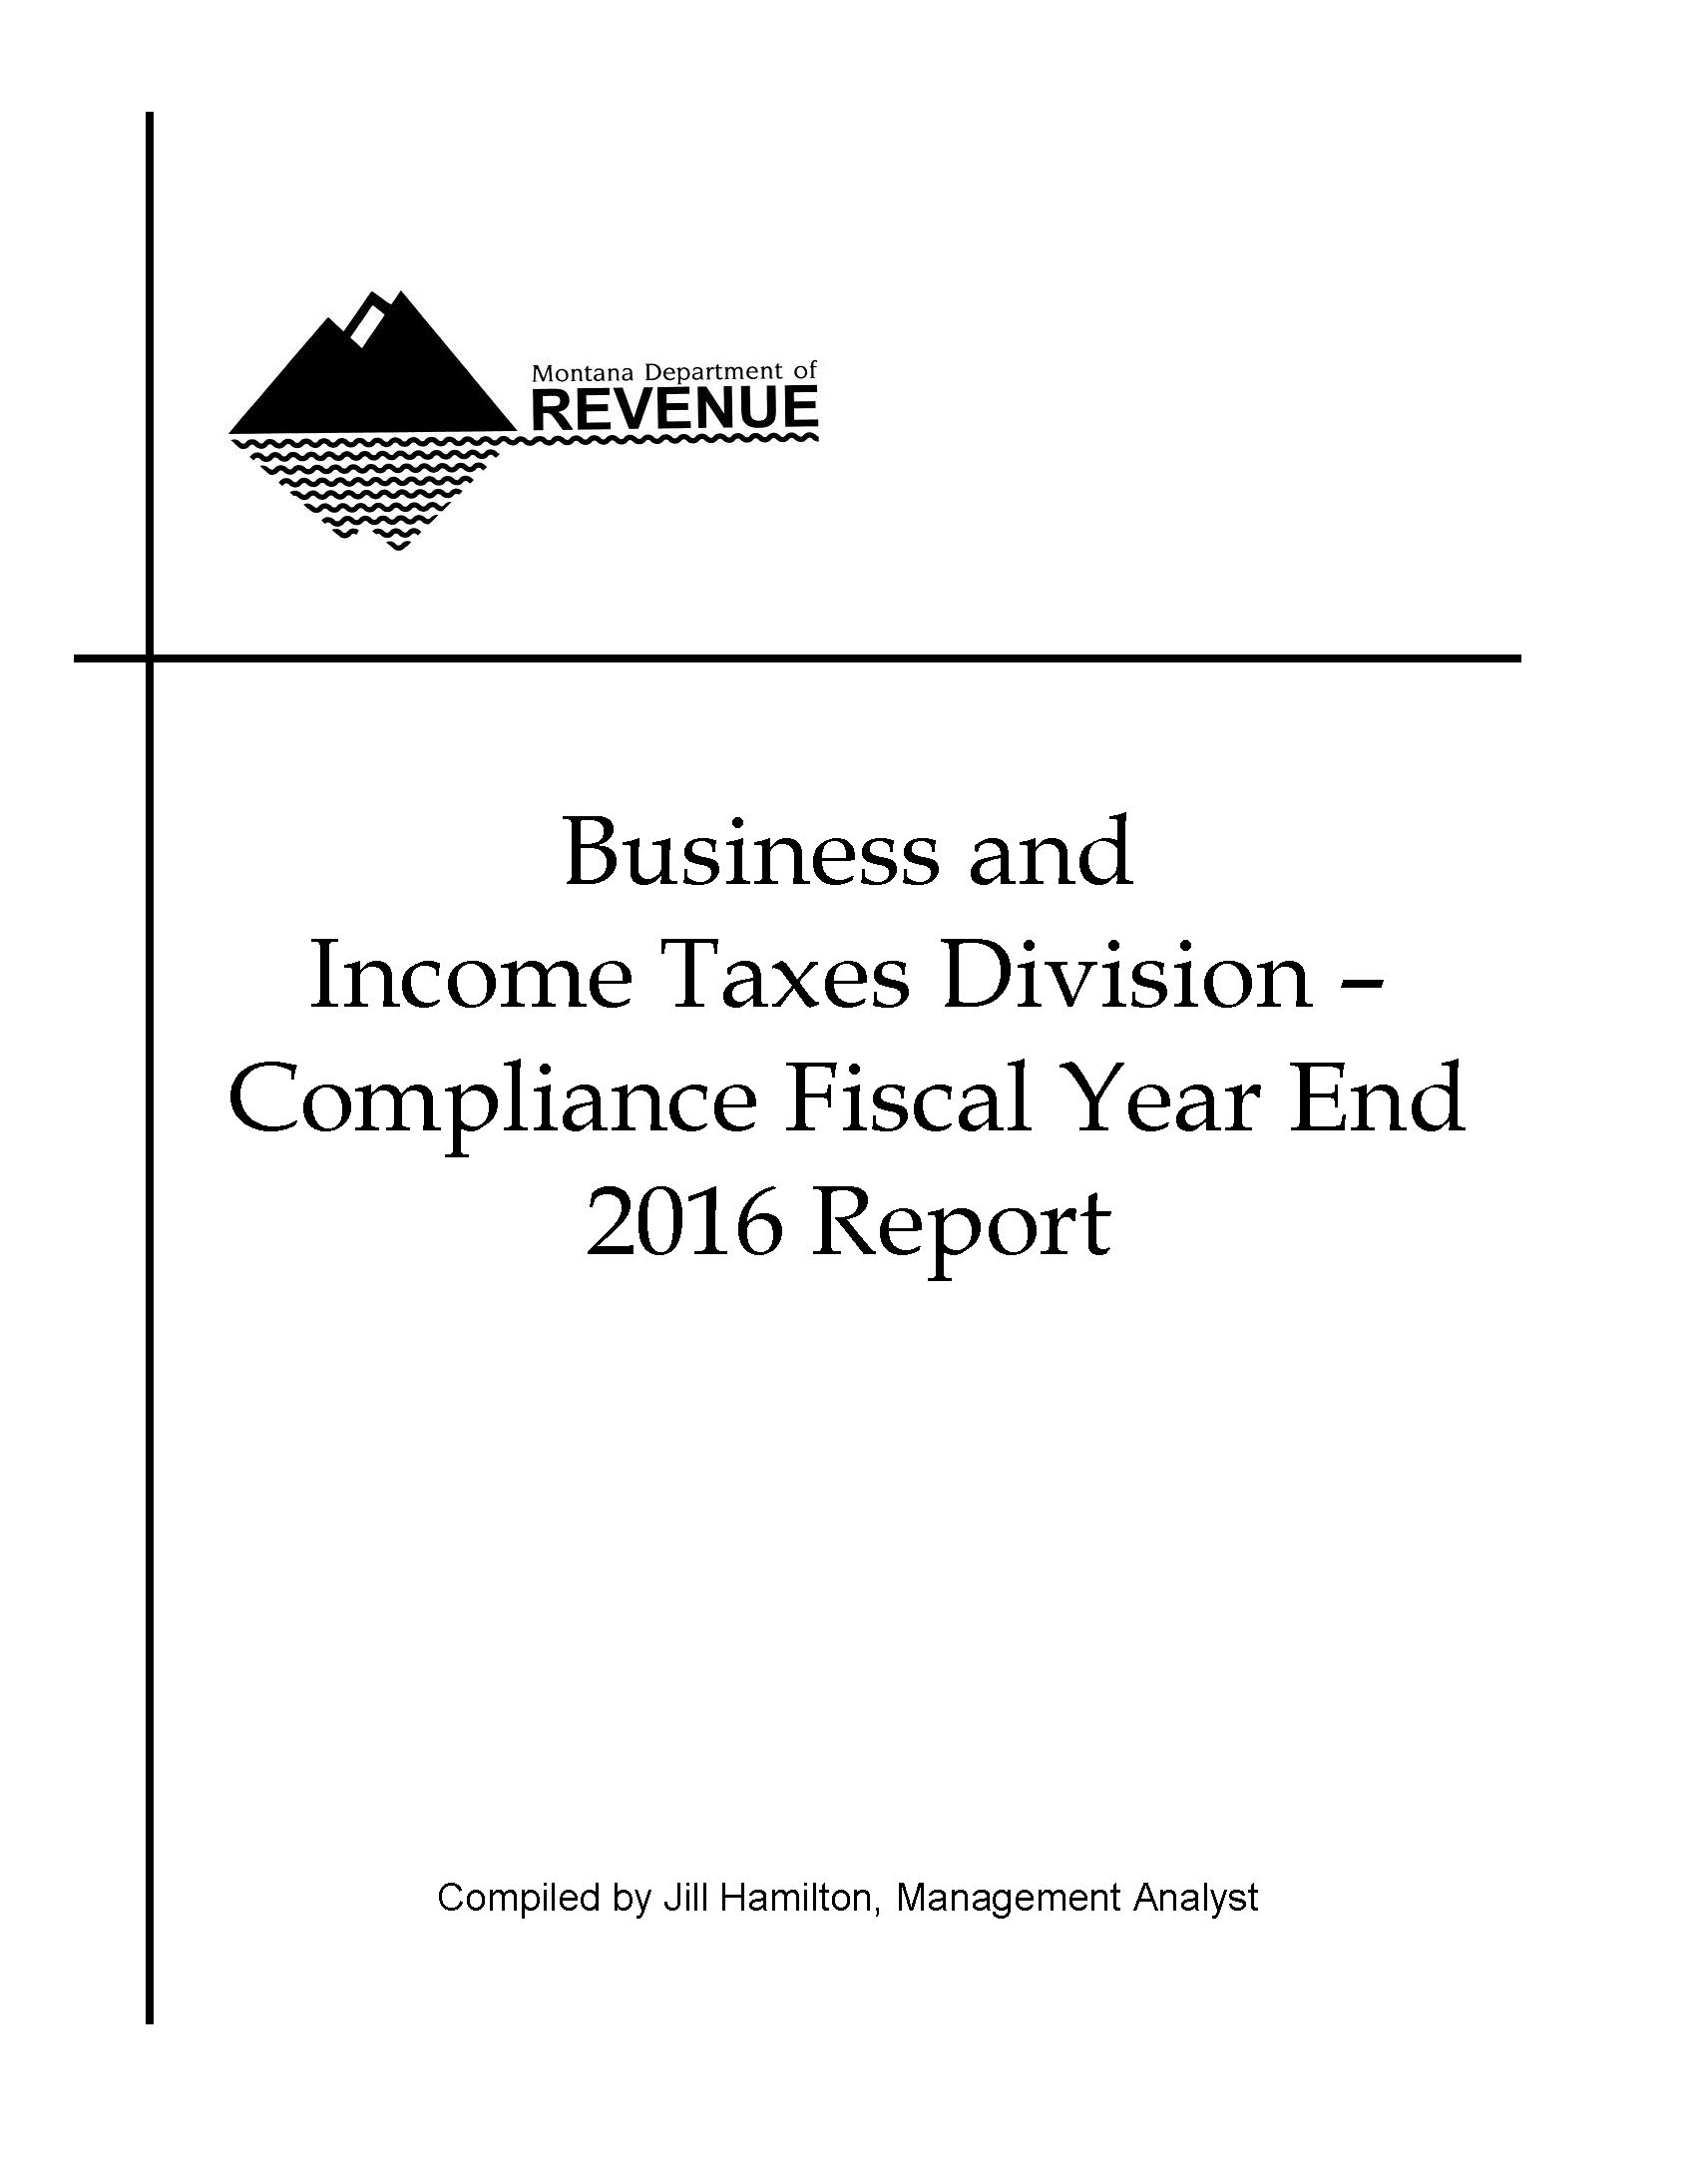 2016 Compliance Fiscal Year End Report Cover